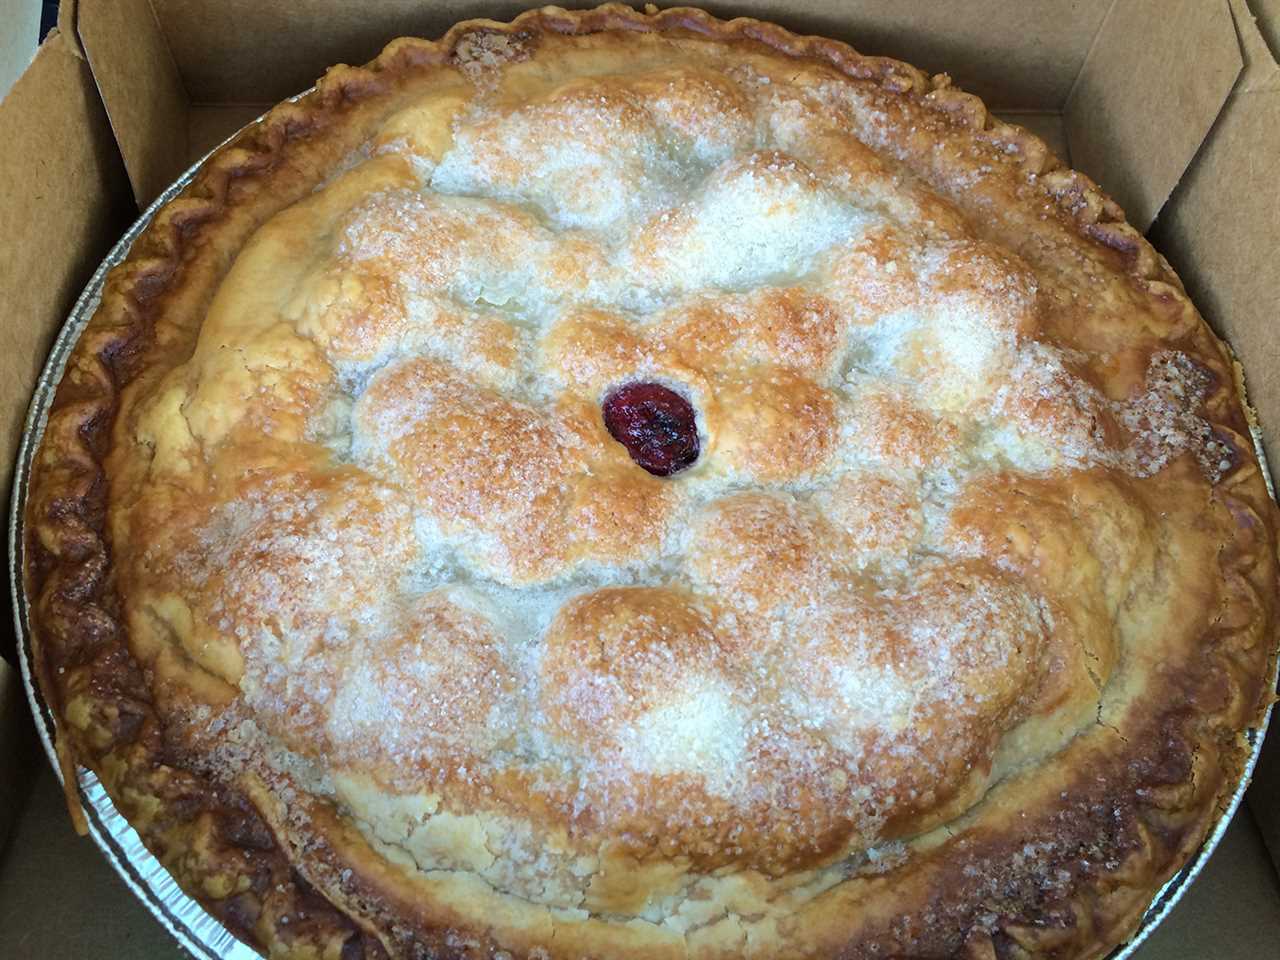 A cherry pie covered with sugar and coated with crust.